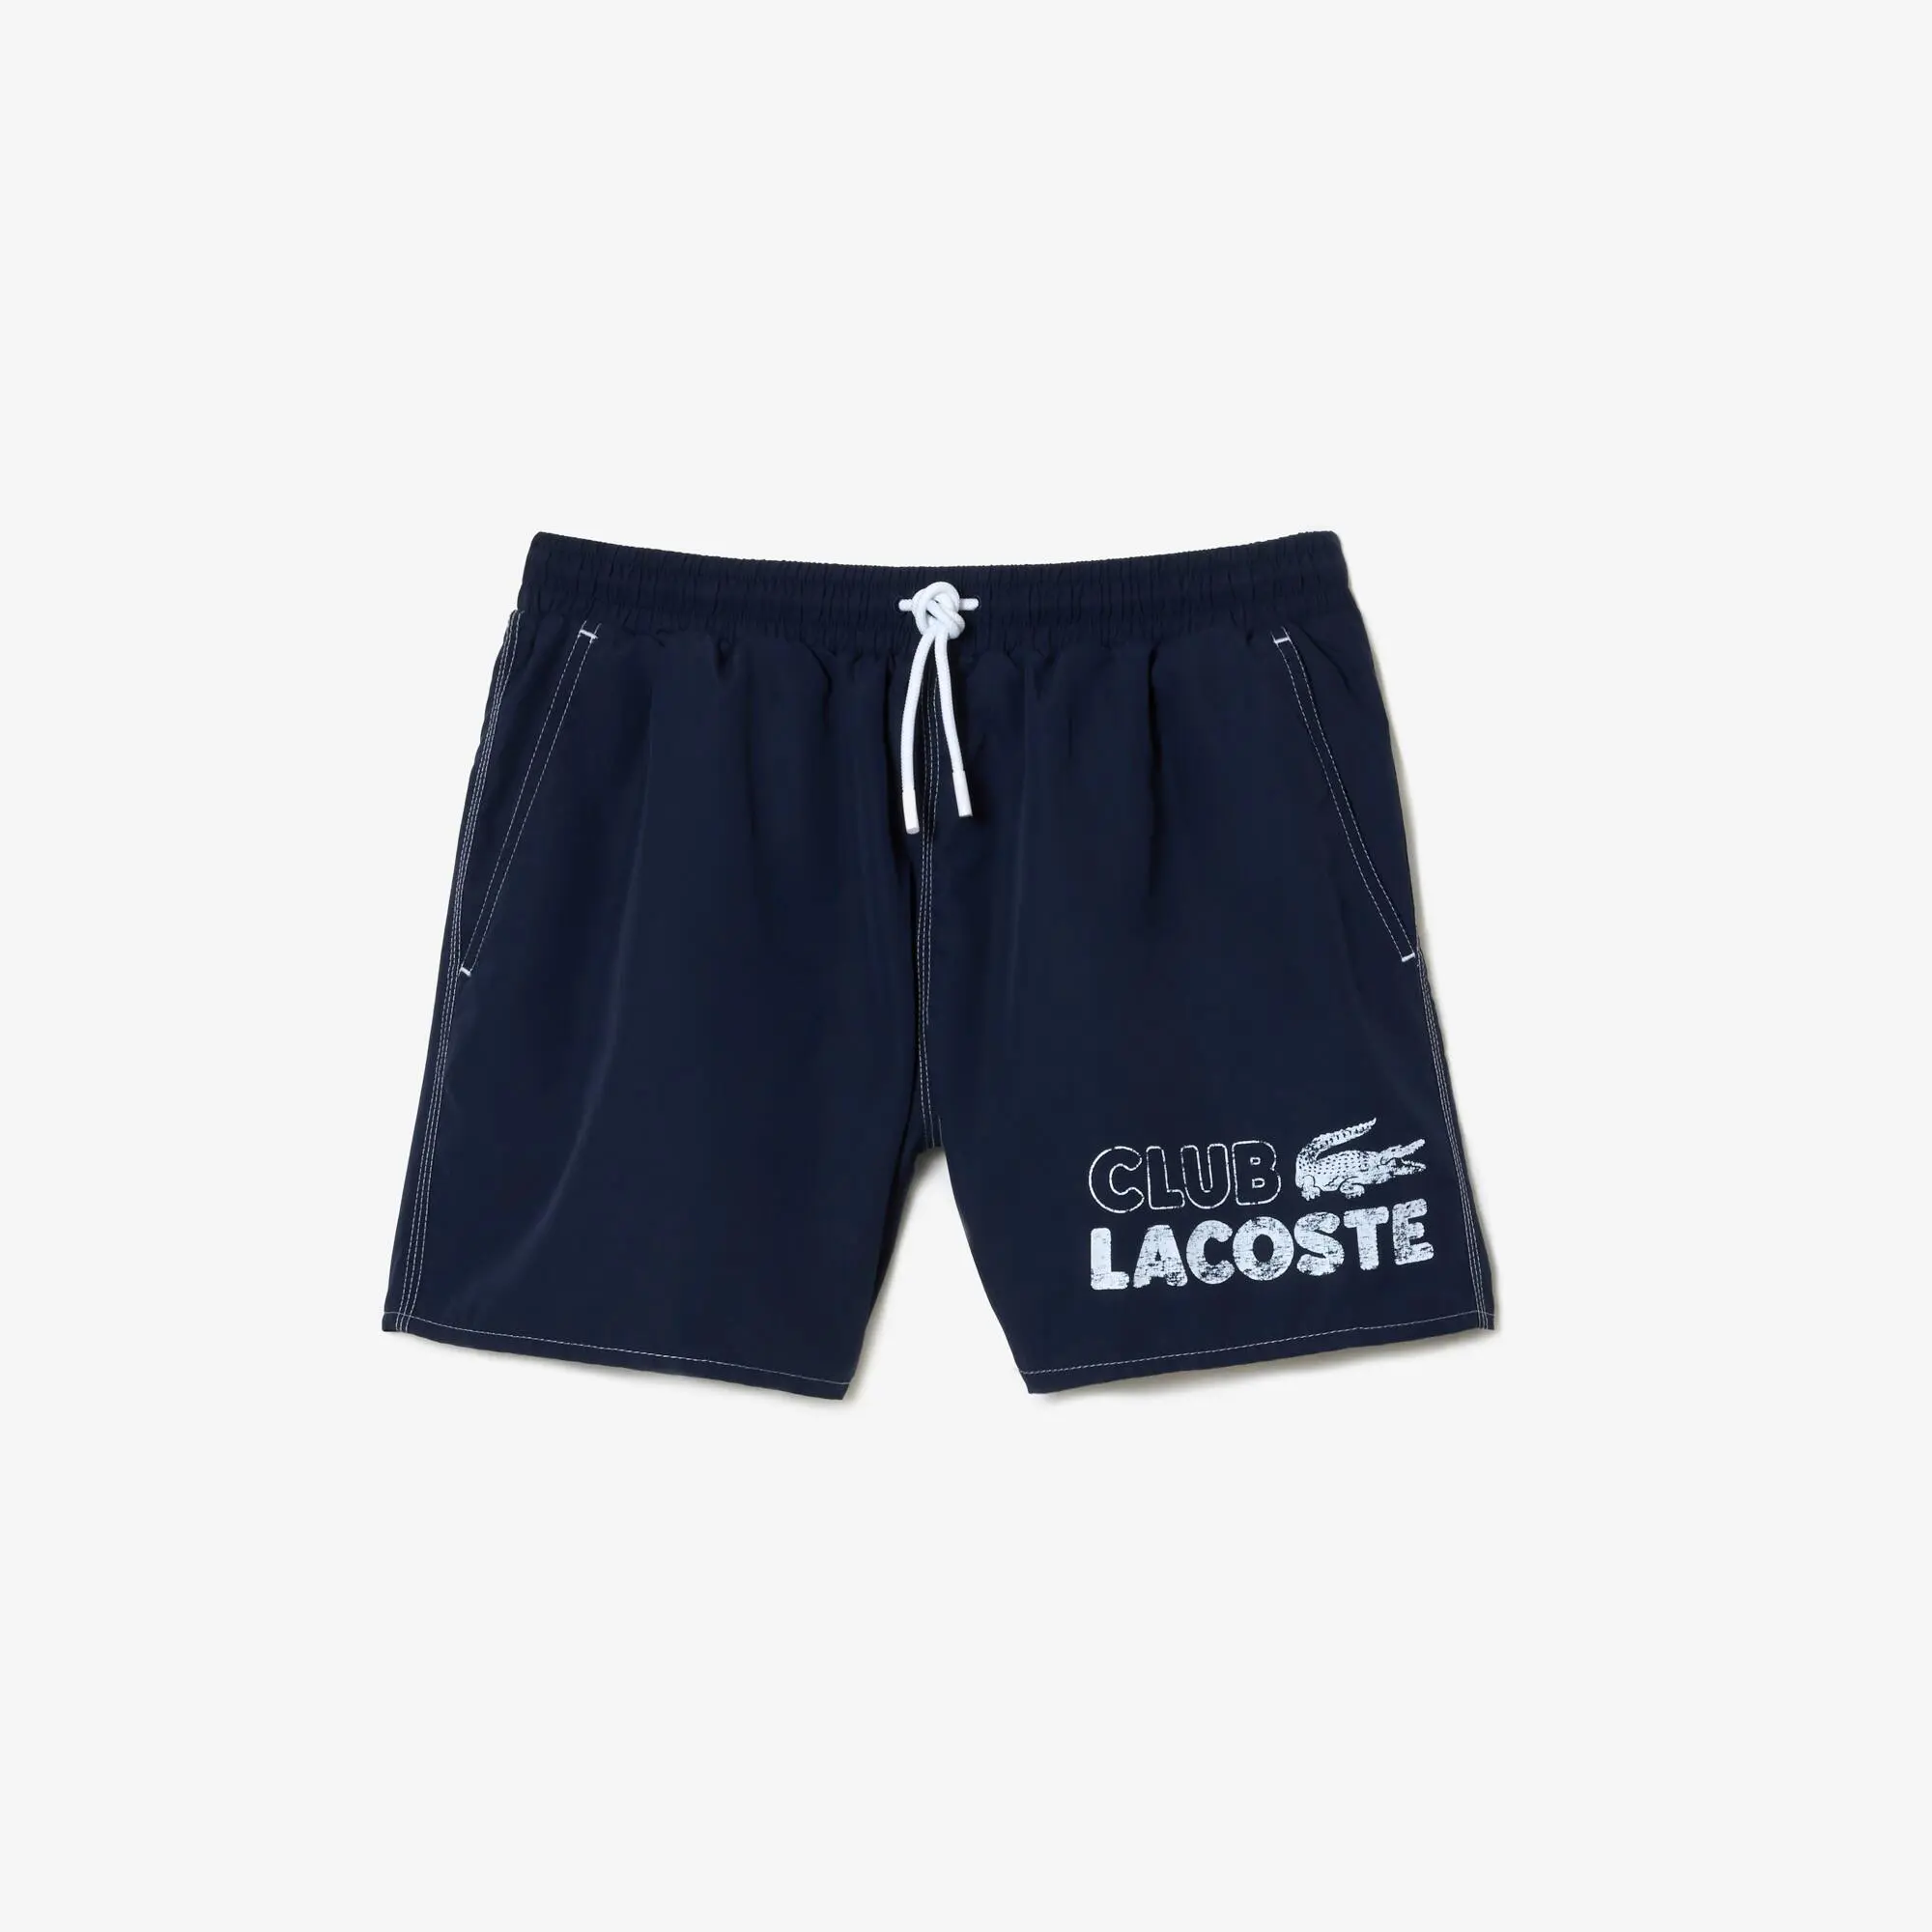 Lacoste Men’s Lacoste Quick Dry Swim Trunks with Integrated Lining. 2